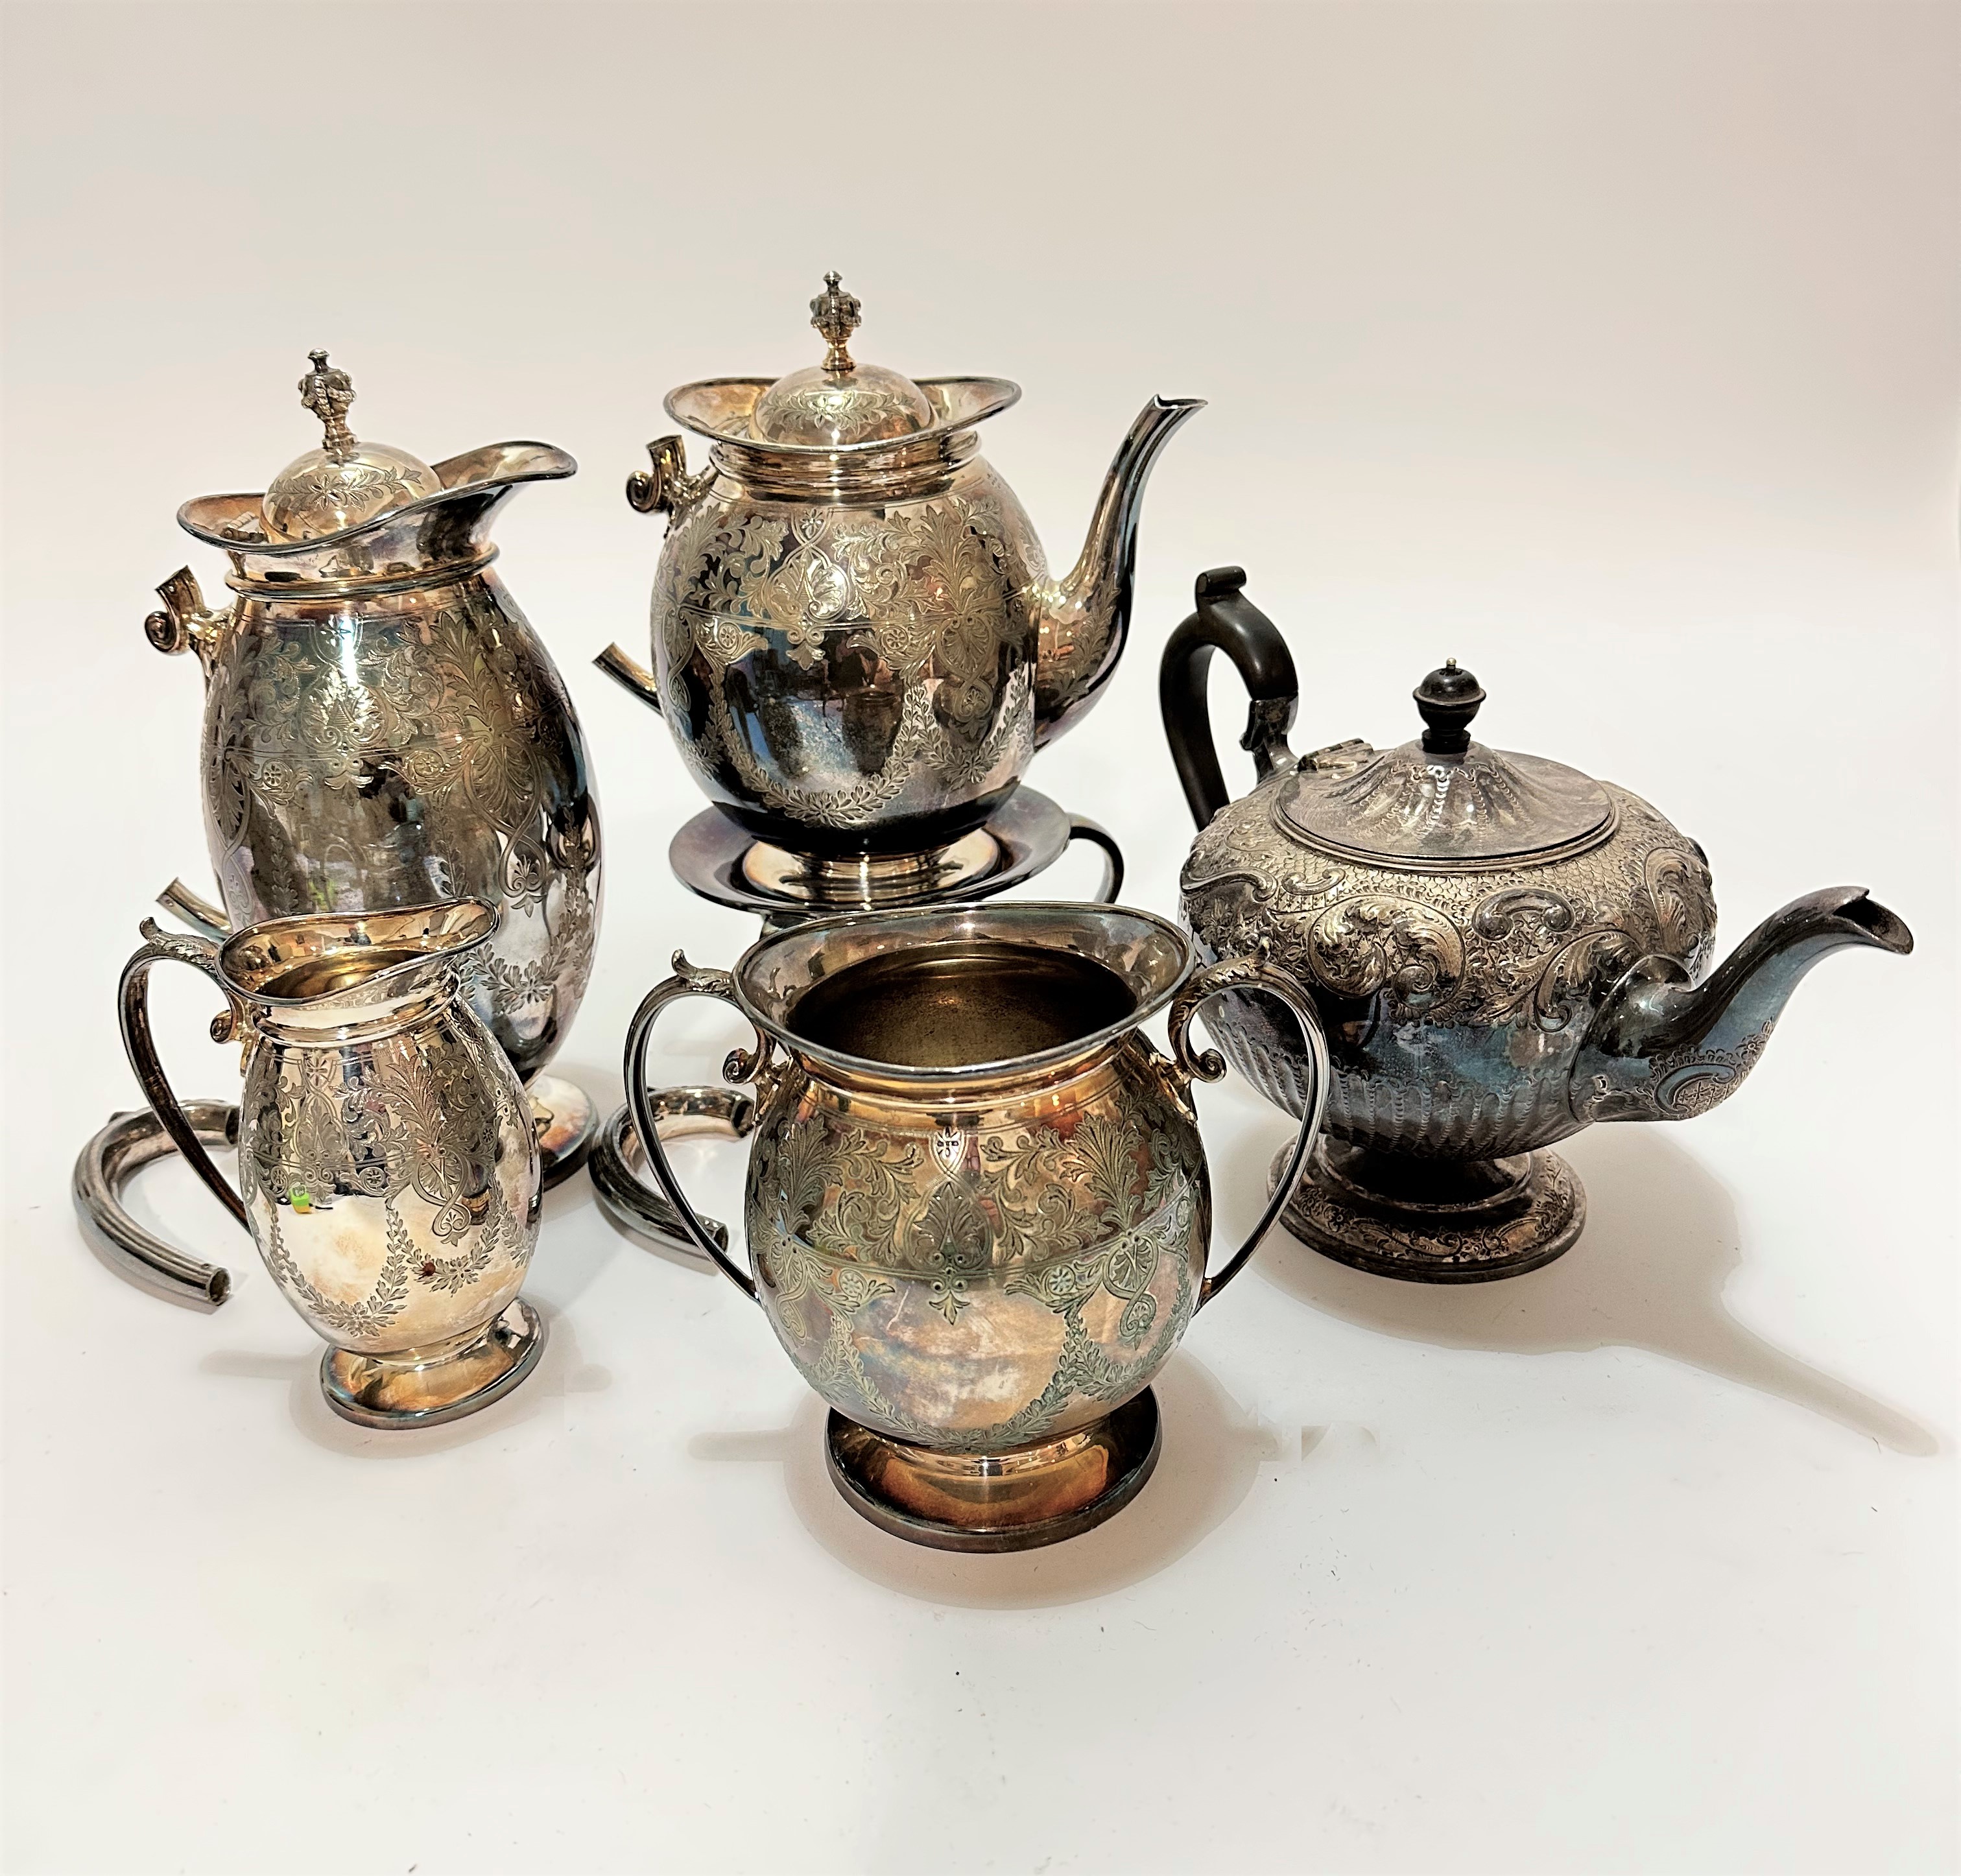 An Edwardian Epns four piece engraved tea and coffee service, with hot water jug, teapot and